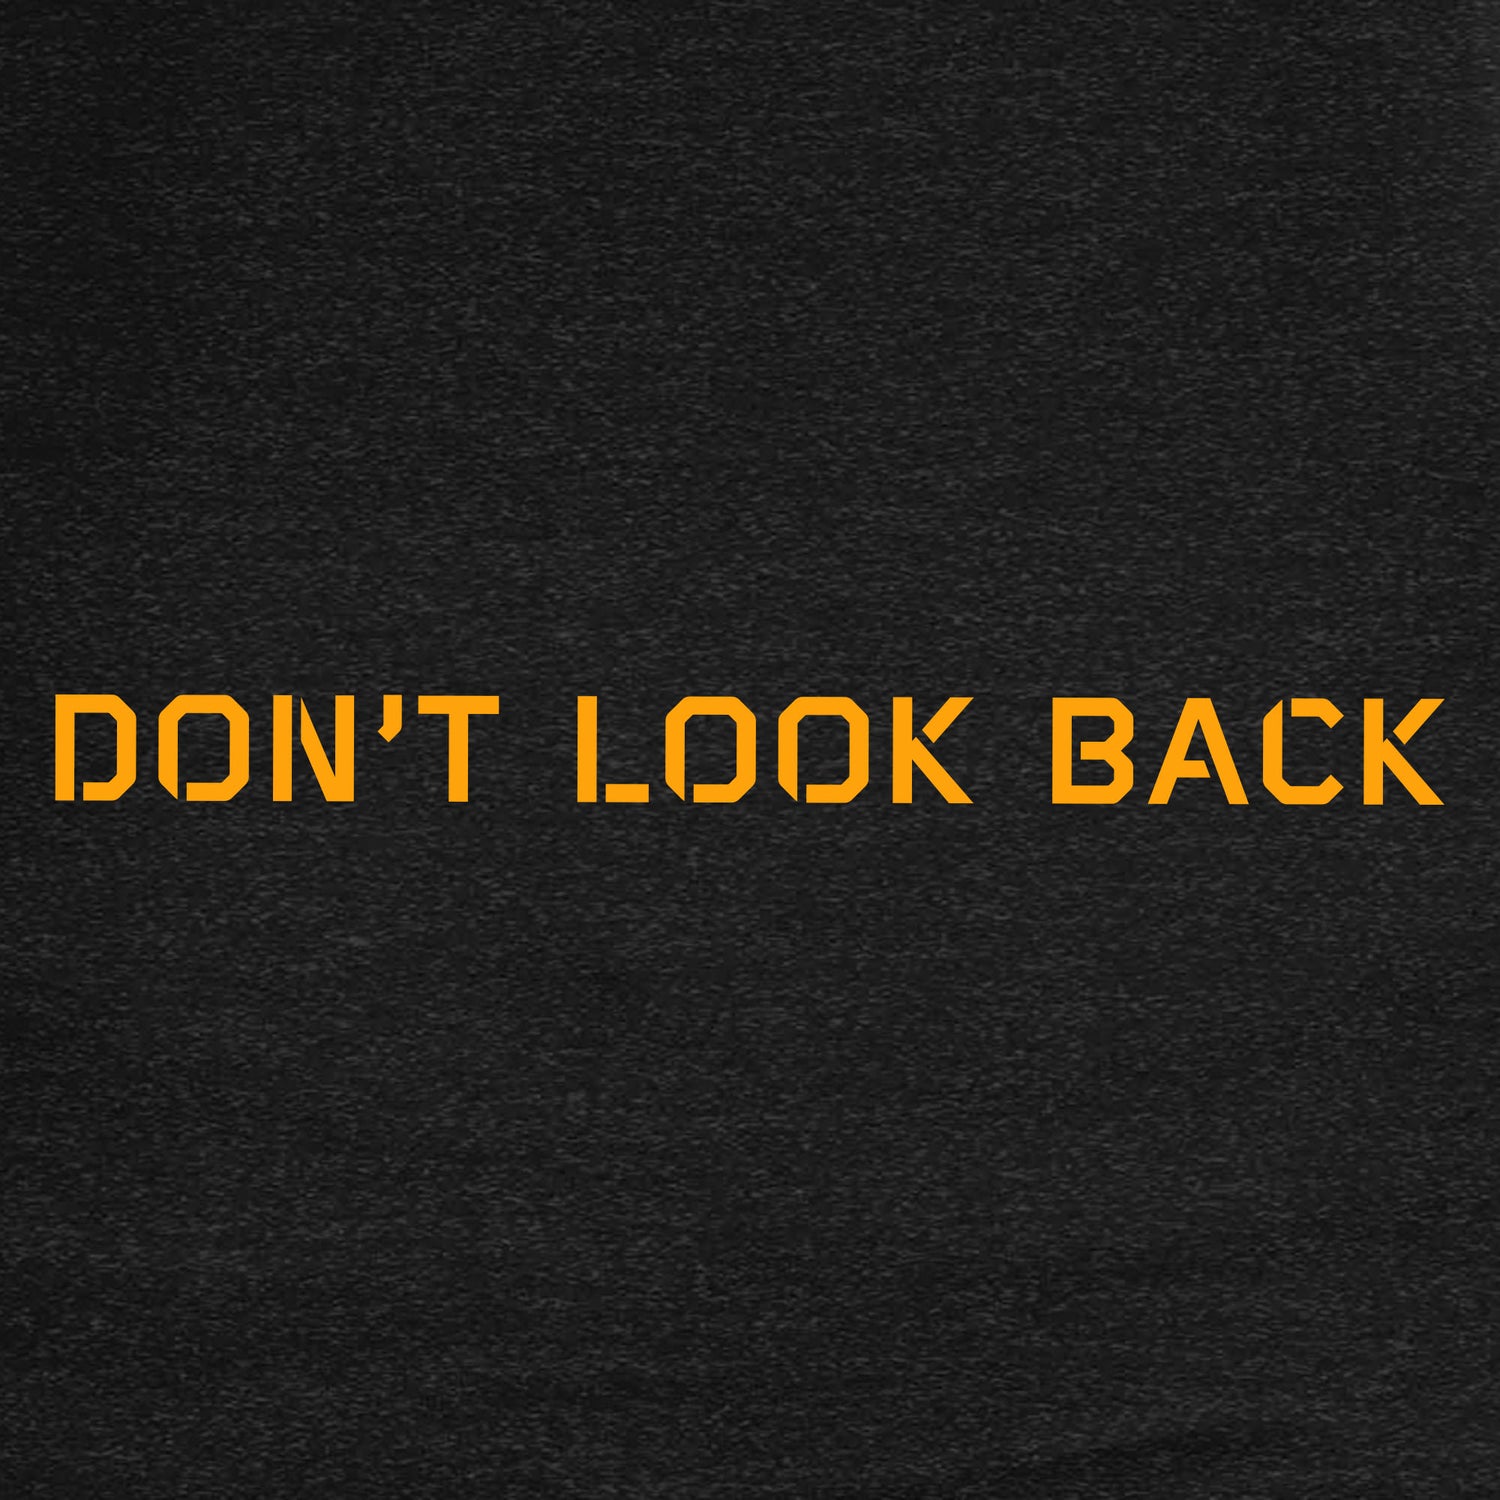 Training Shirts for Women - Don't Look Back 